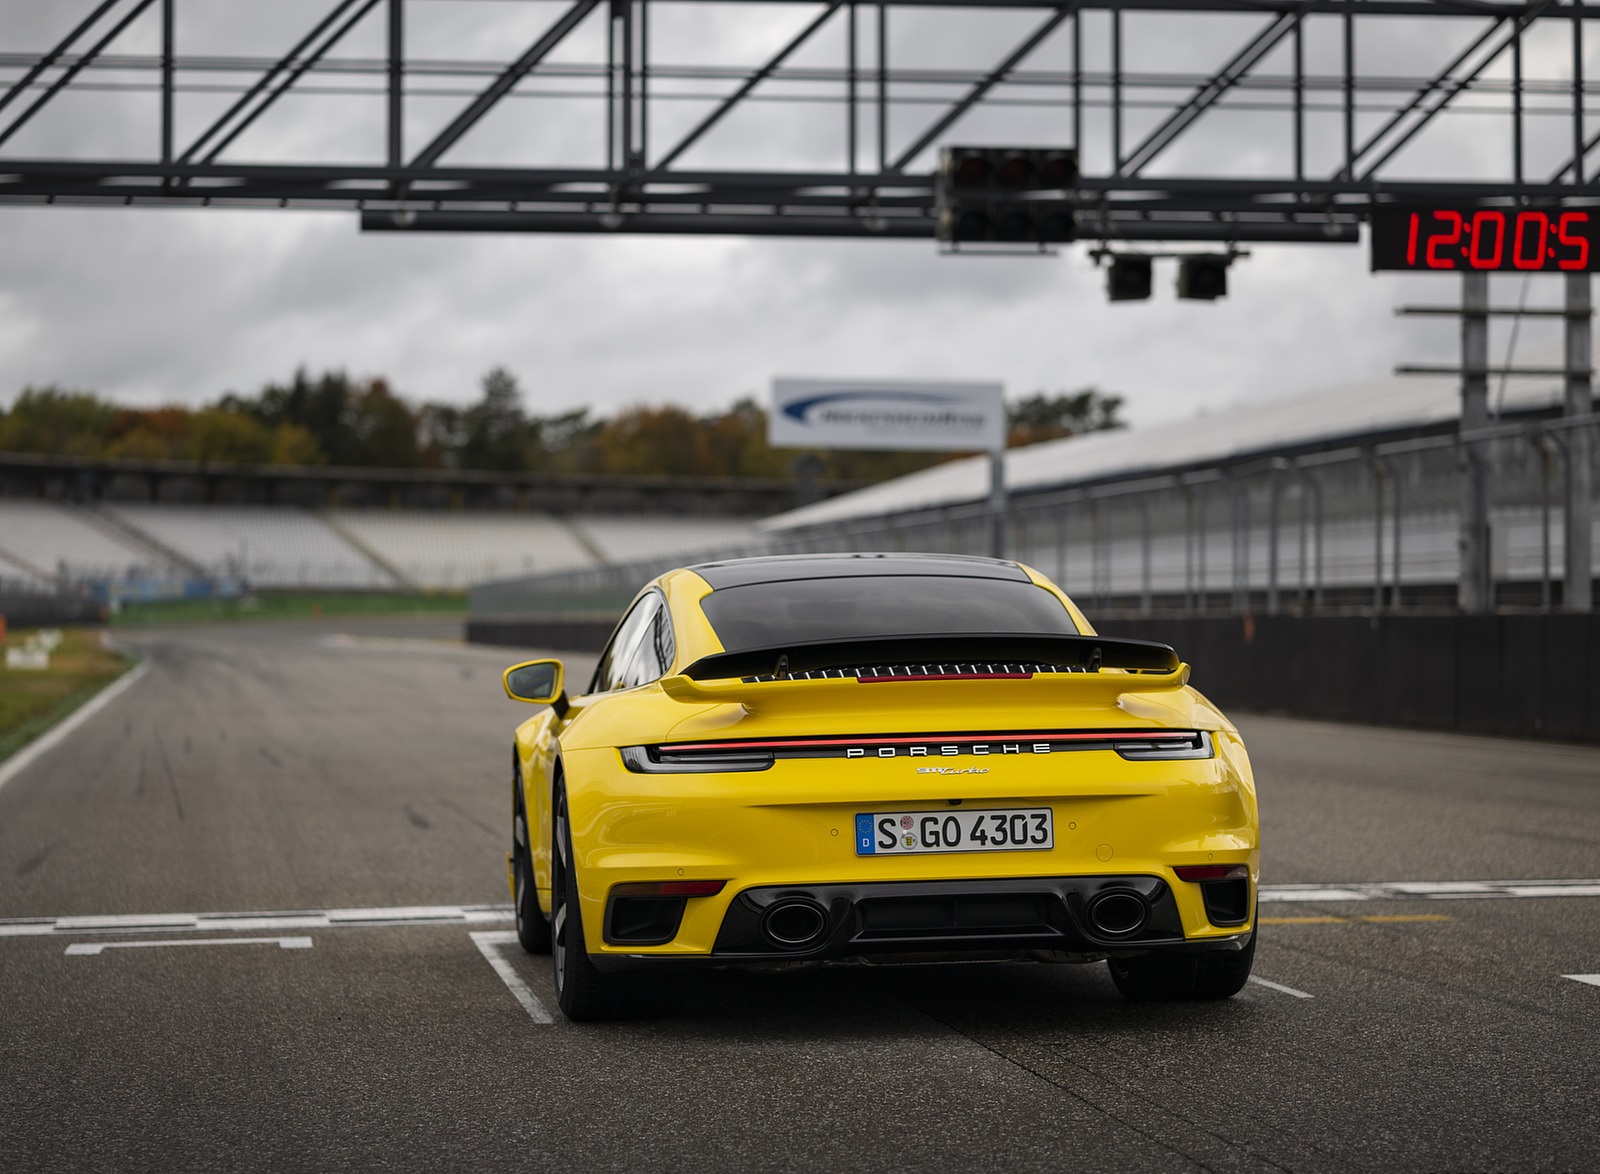 2021 Porsche 911 Turbo (Color: Racing Yellow) Rear Wallpapers  #20 of 225